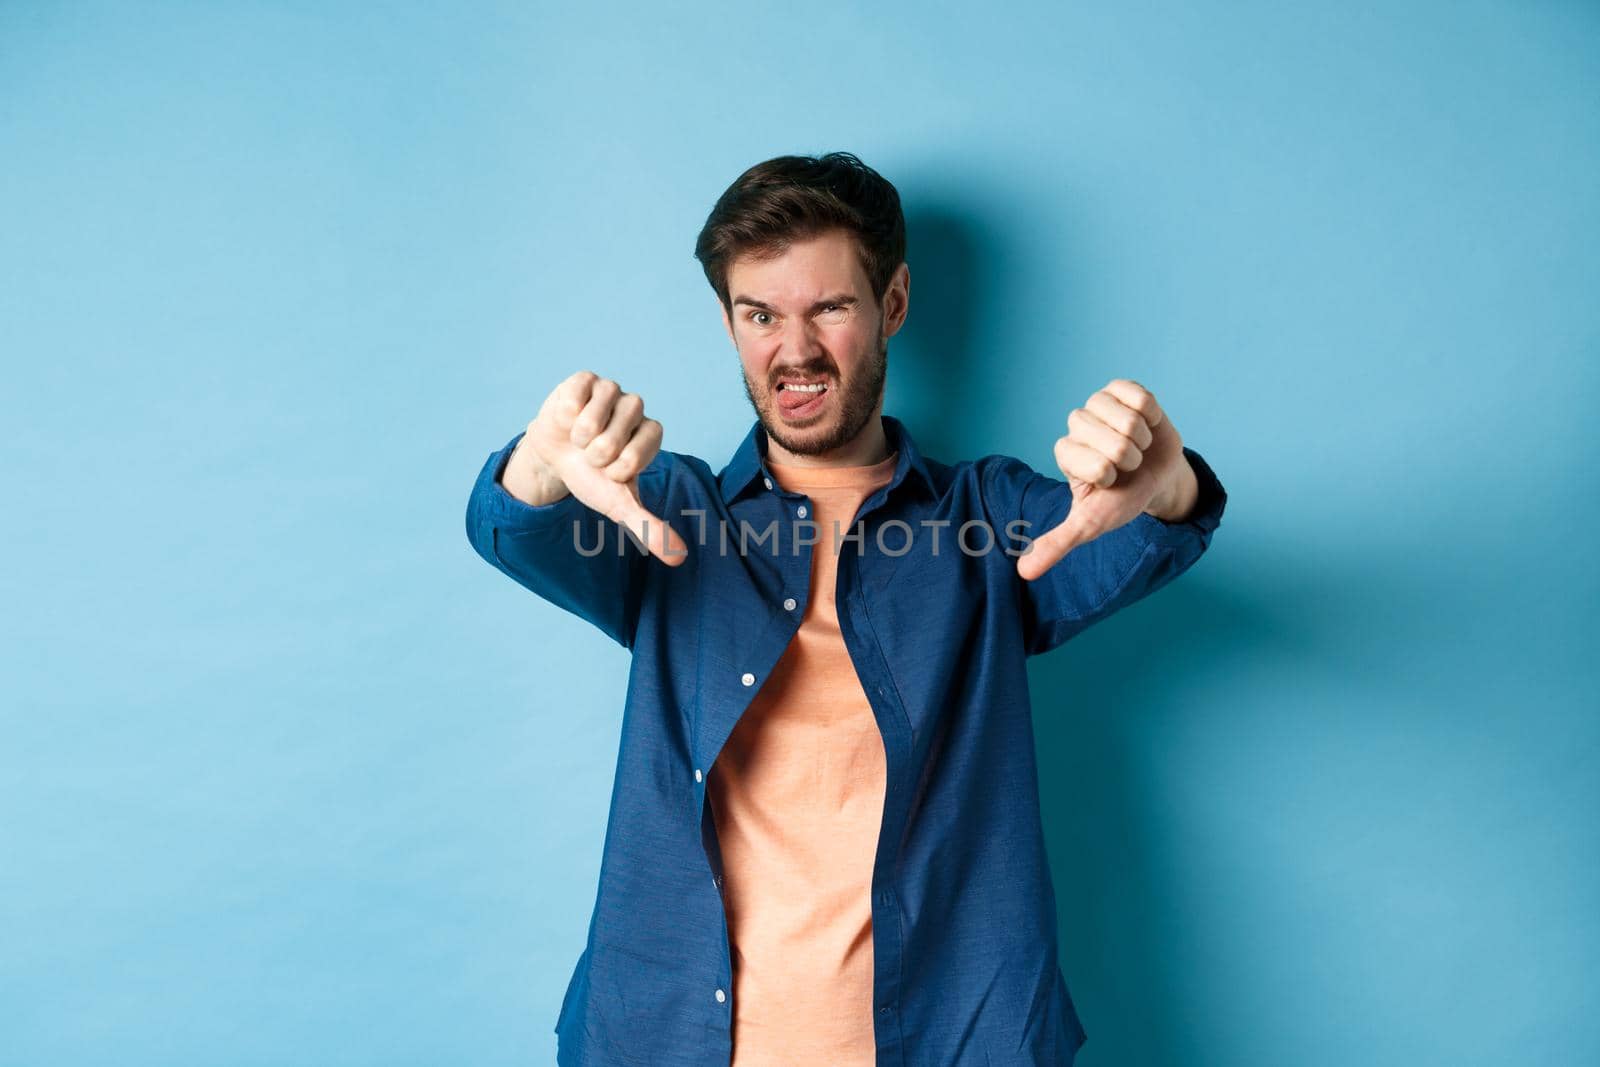 Disgusted guy express negative opinion, showing thumbs down and tongue, frowning upset, disapprove something bad, standing on blue background.